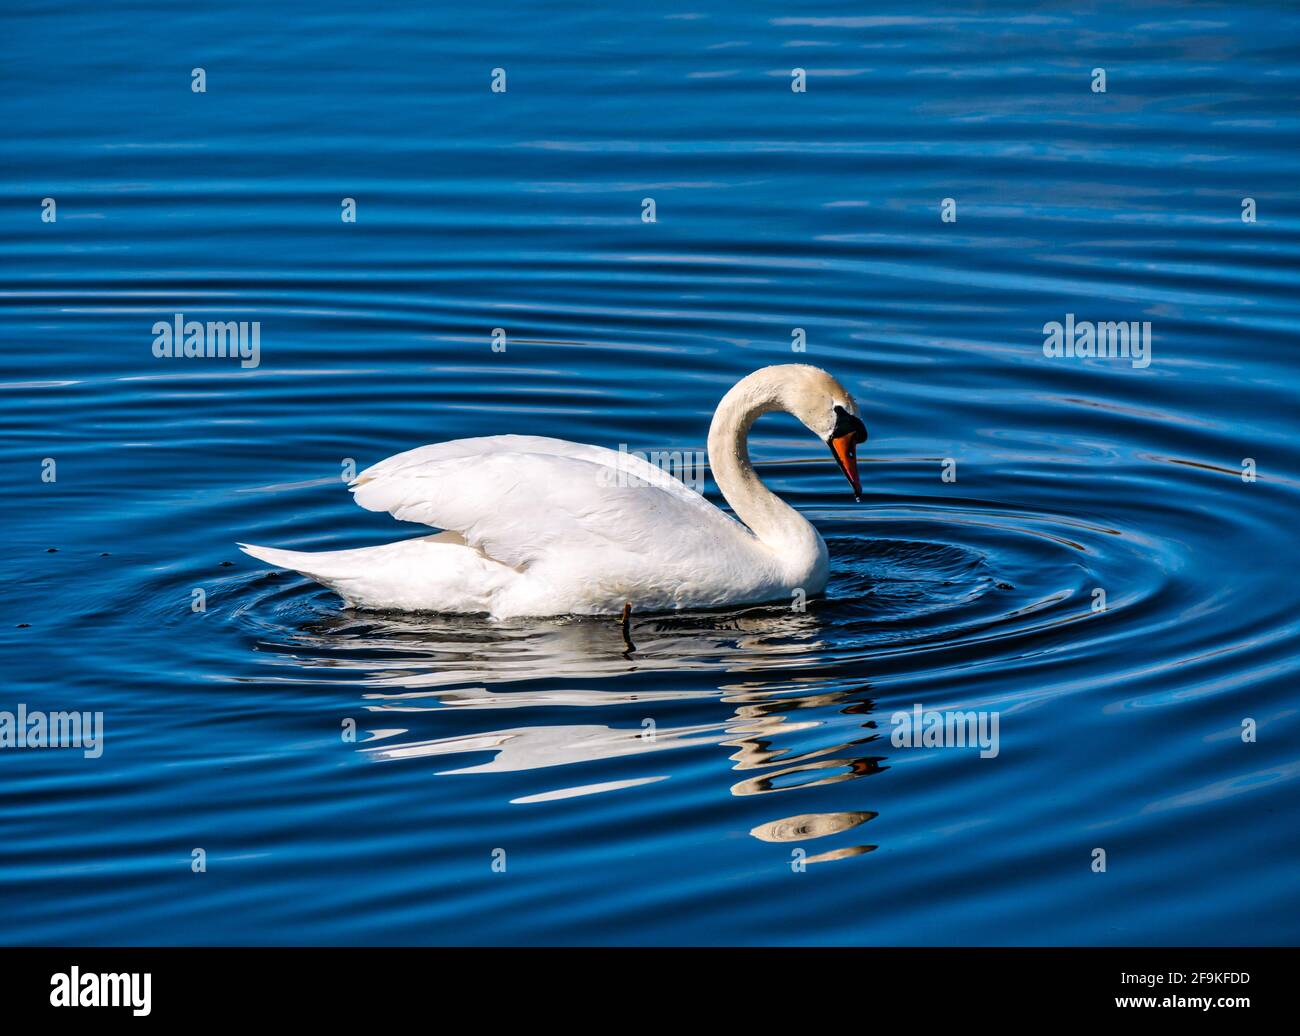 A male mute swan (Cygnus olor) swimming in a reservoir in sunshine creating circular water ripples, Scotland, UK Stock Photo